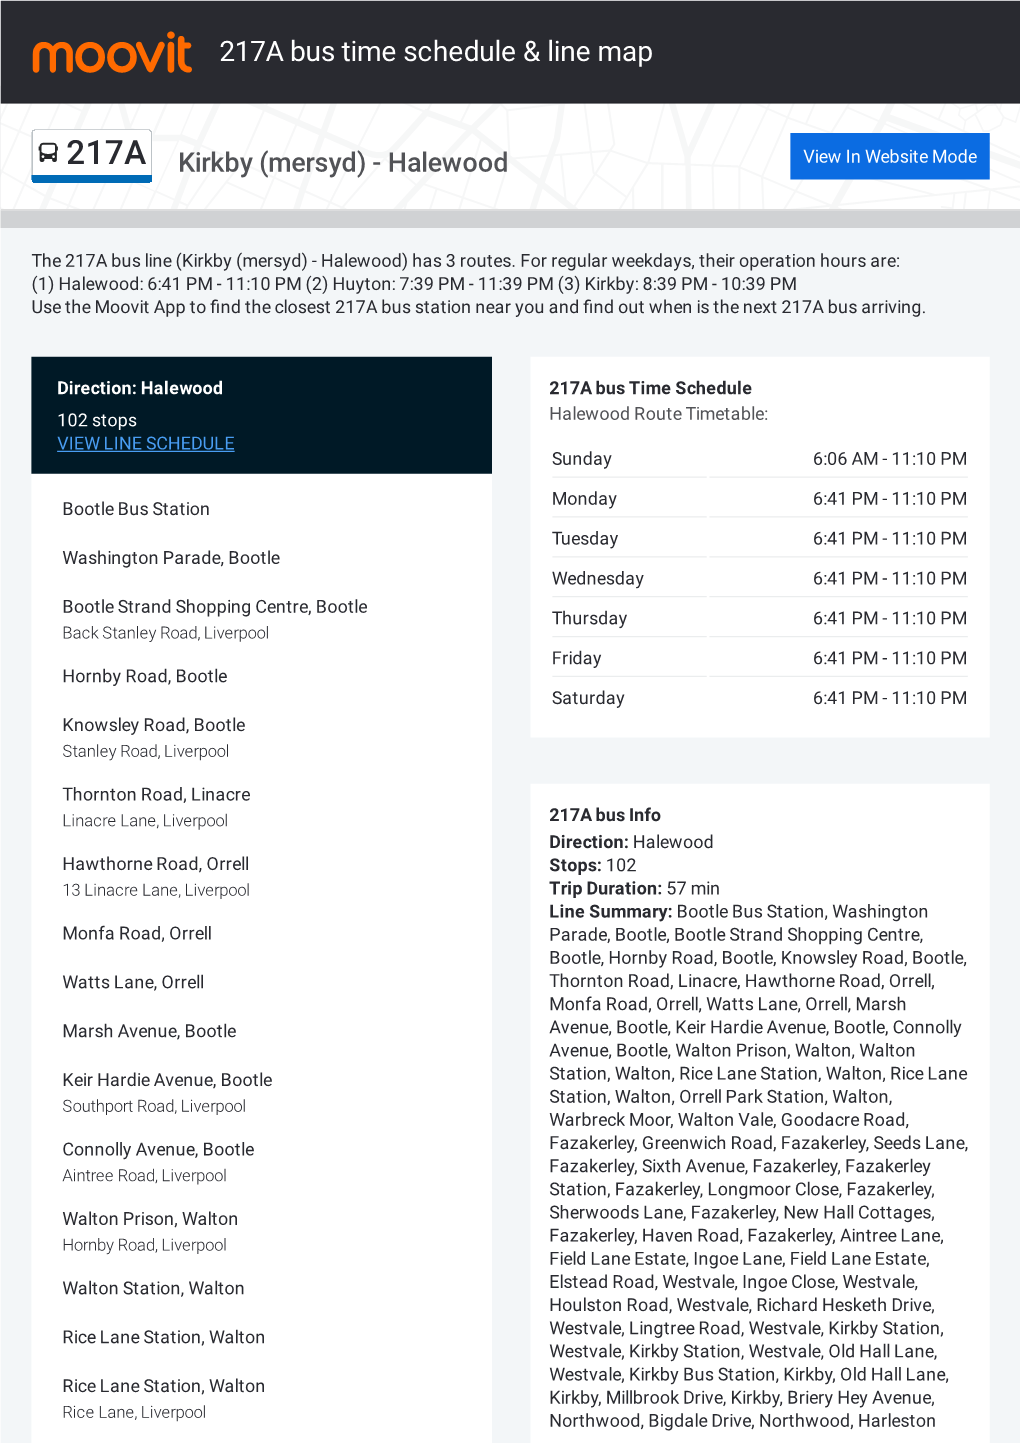 217A Bus Time Schedule & Line Route